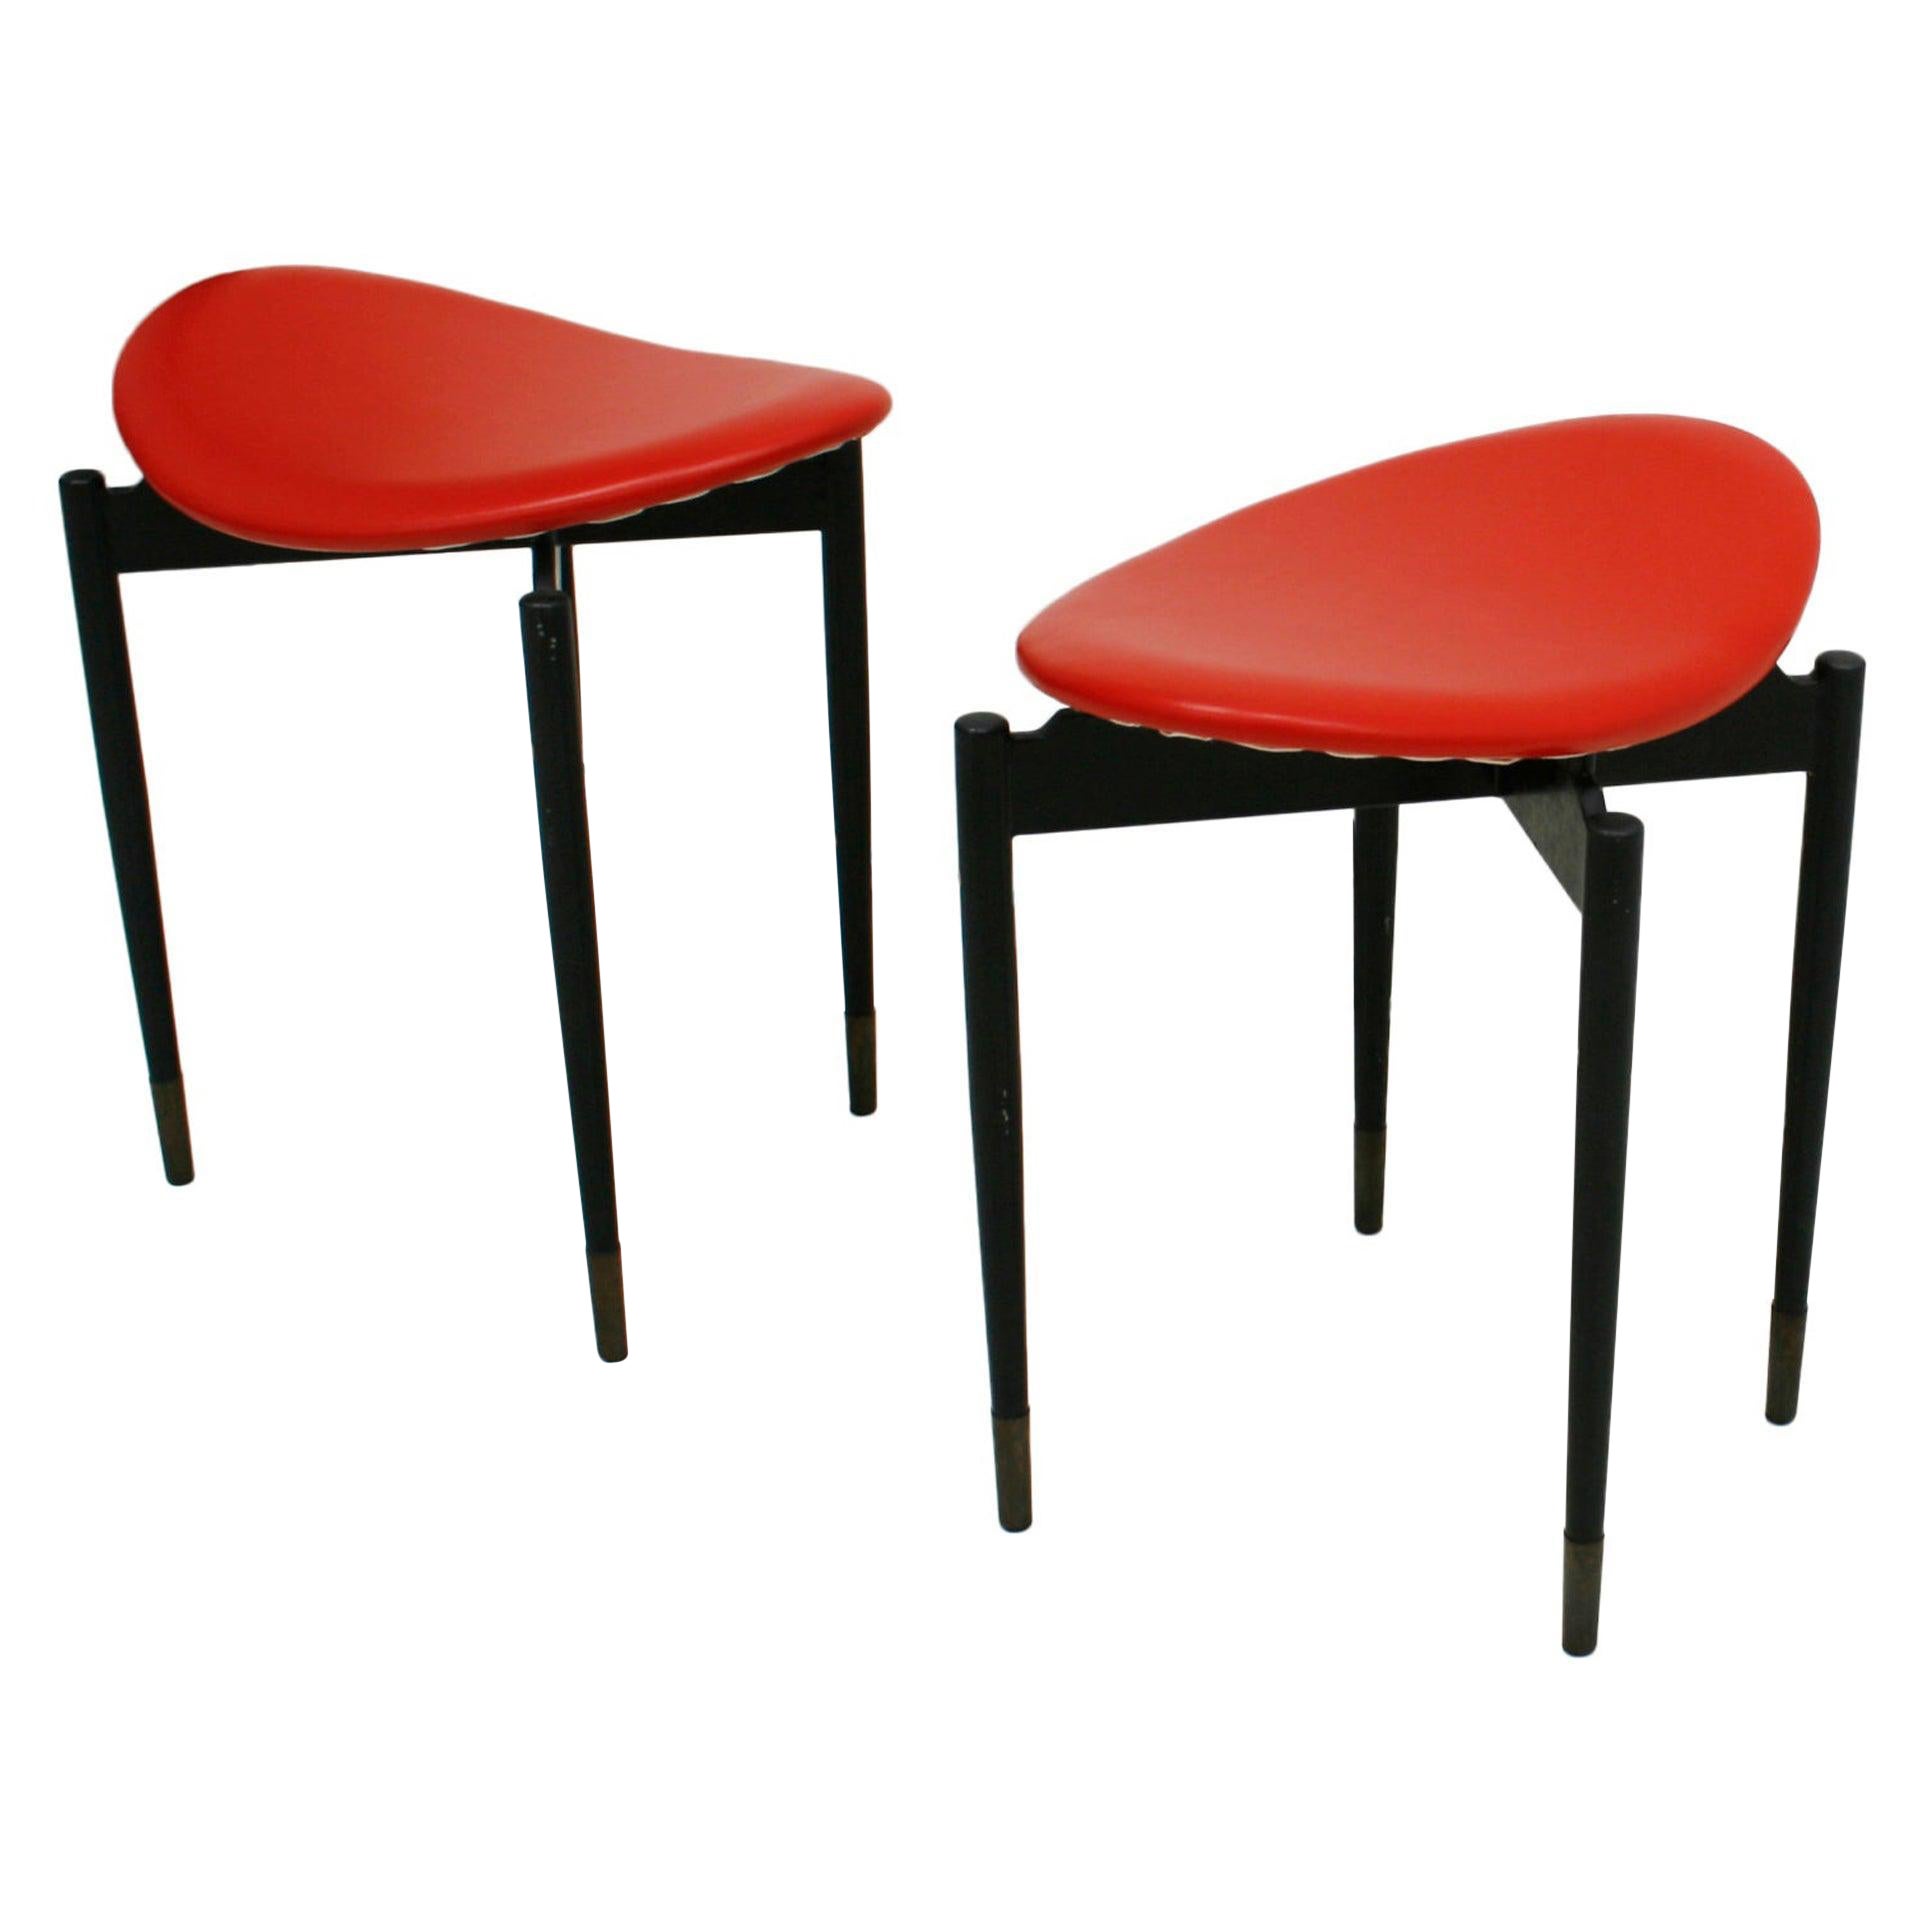 Midcentury Set of Two "Lutrario" Stools Designed by Carlo Mollino, Italy, 1959 For Sale